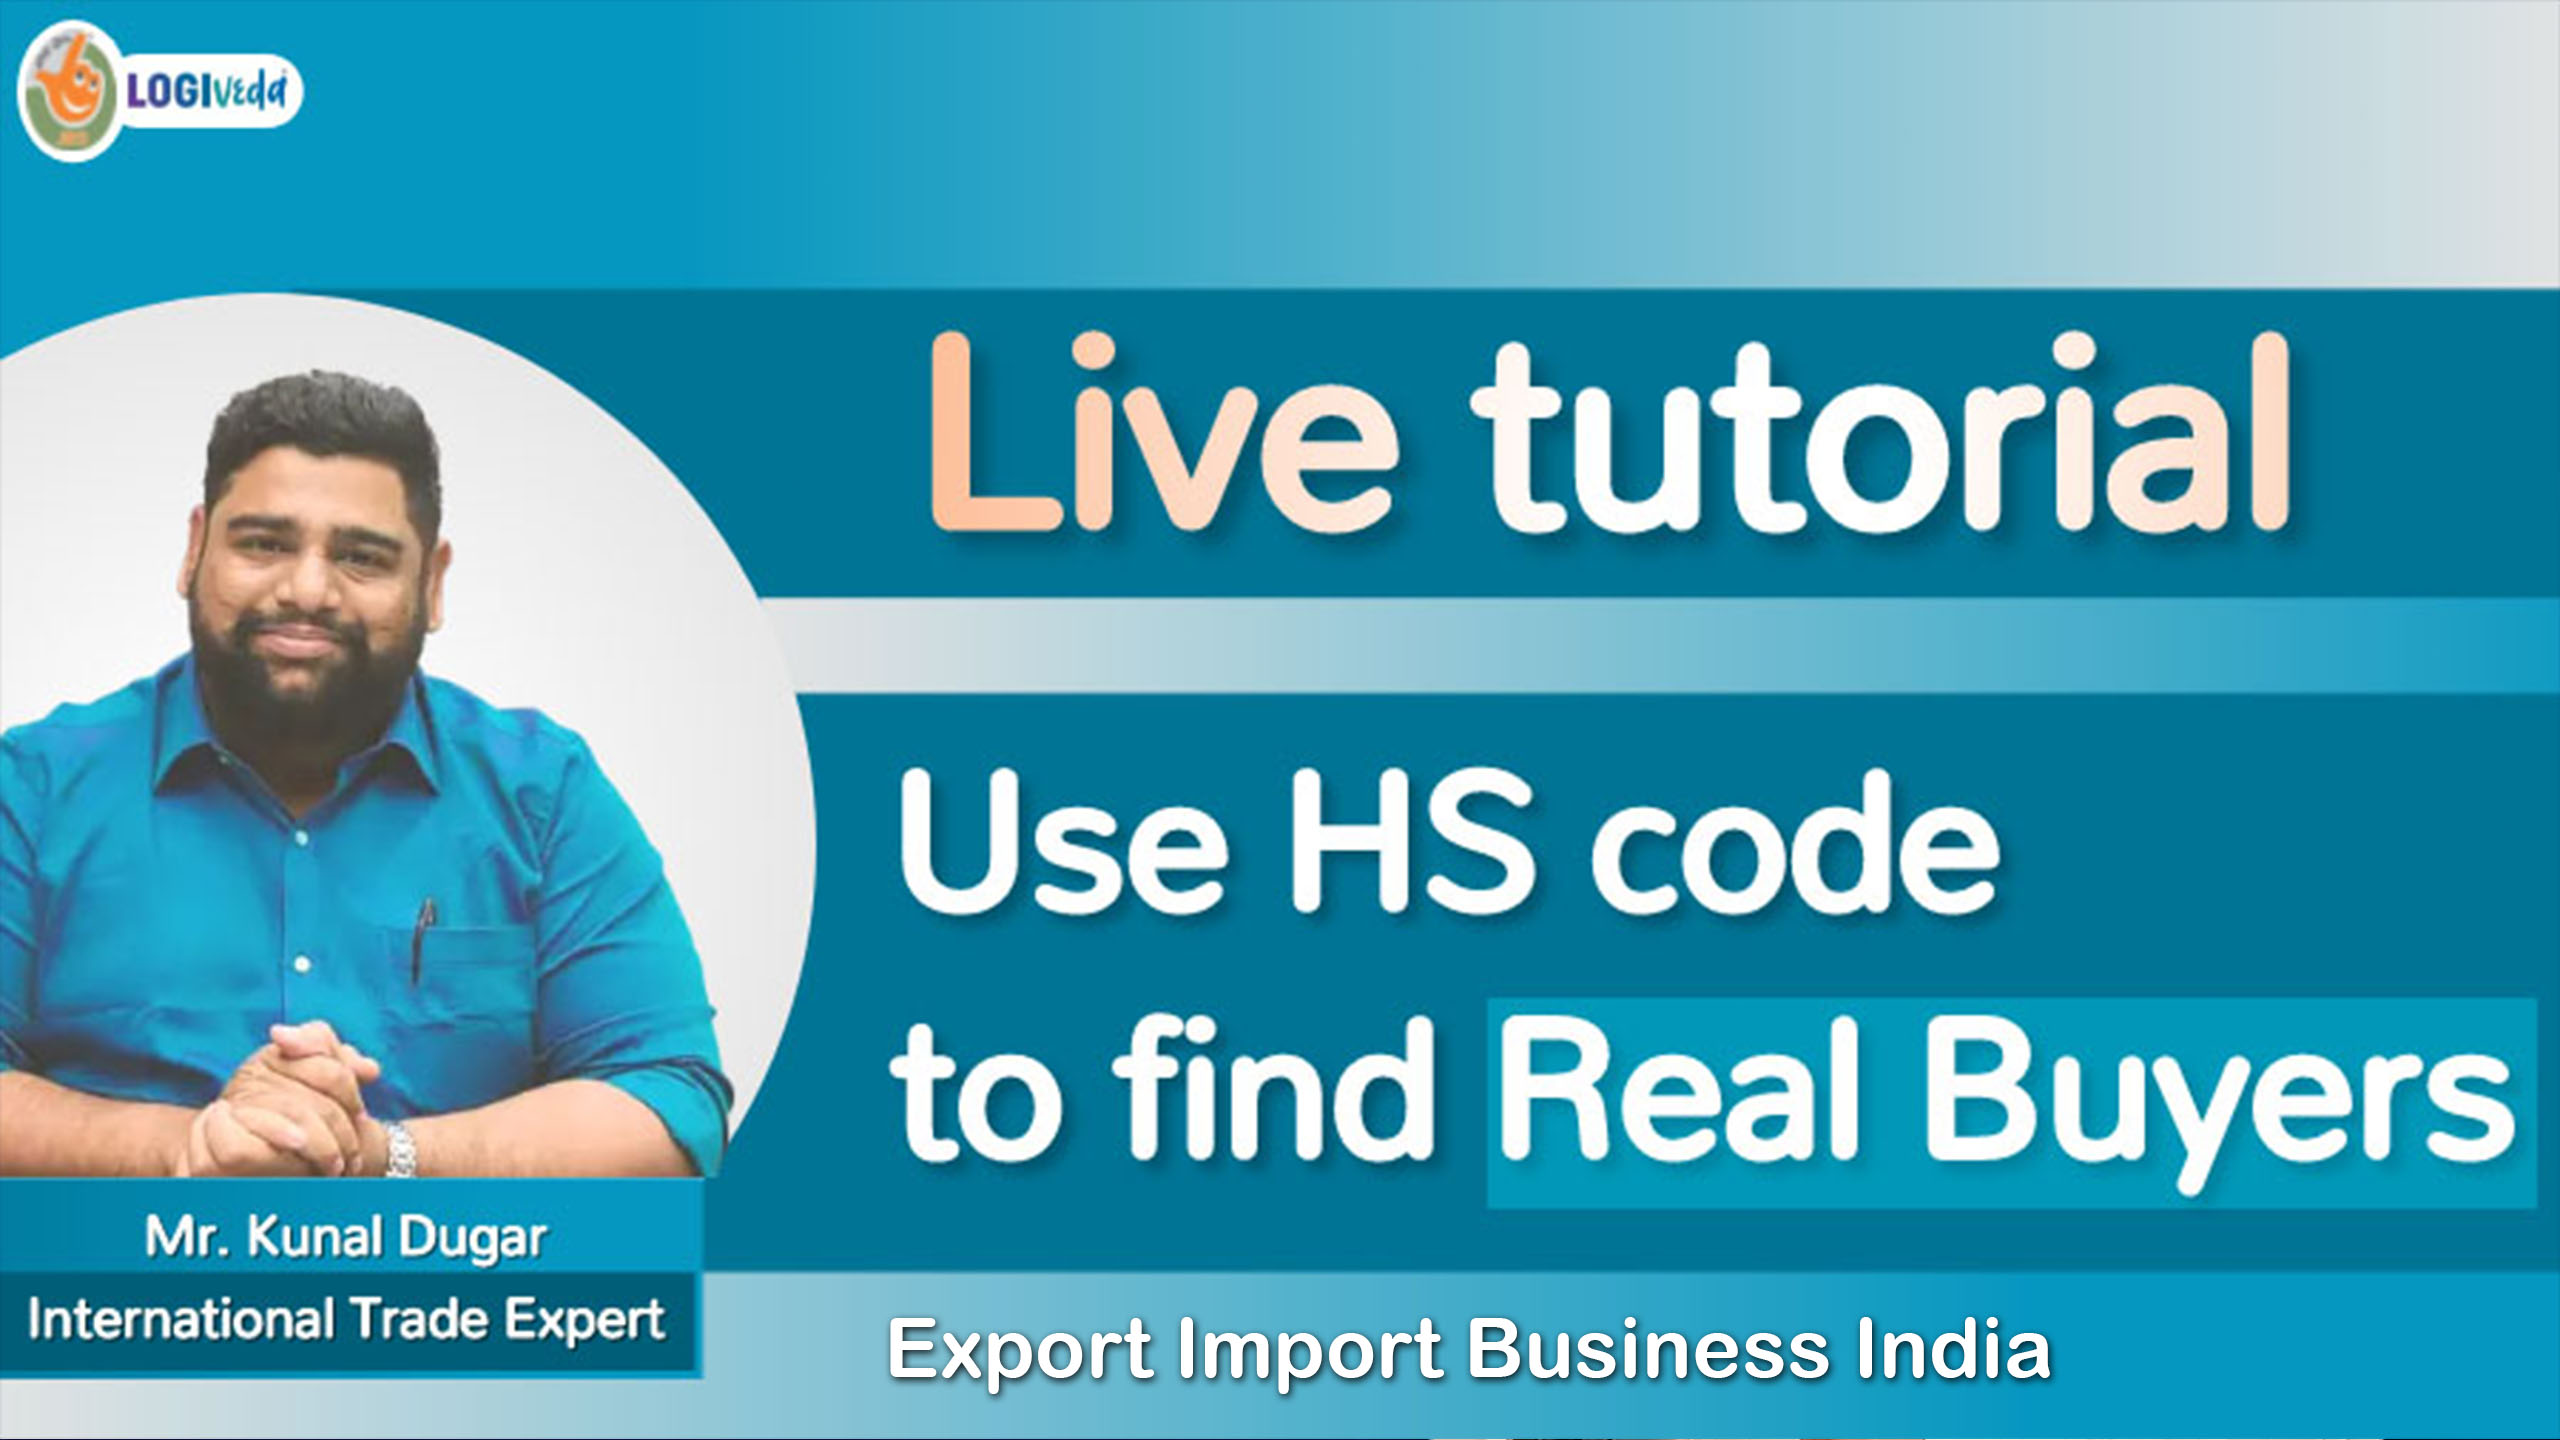 Live tutorial | Use HS code to find Real Buyers | Export Import Business India - Mr. Kunal Dugar